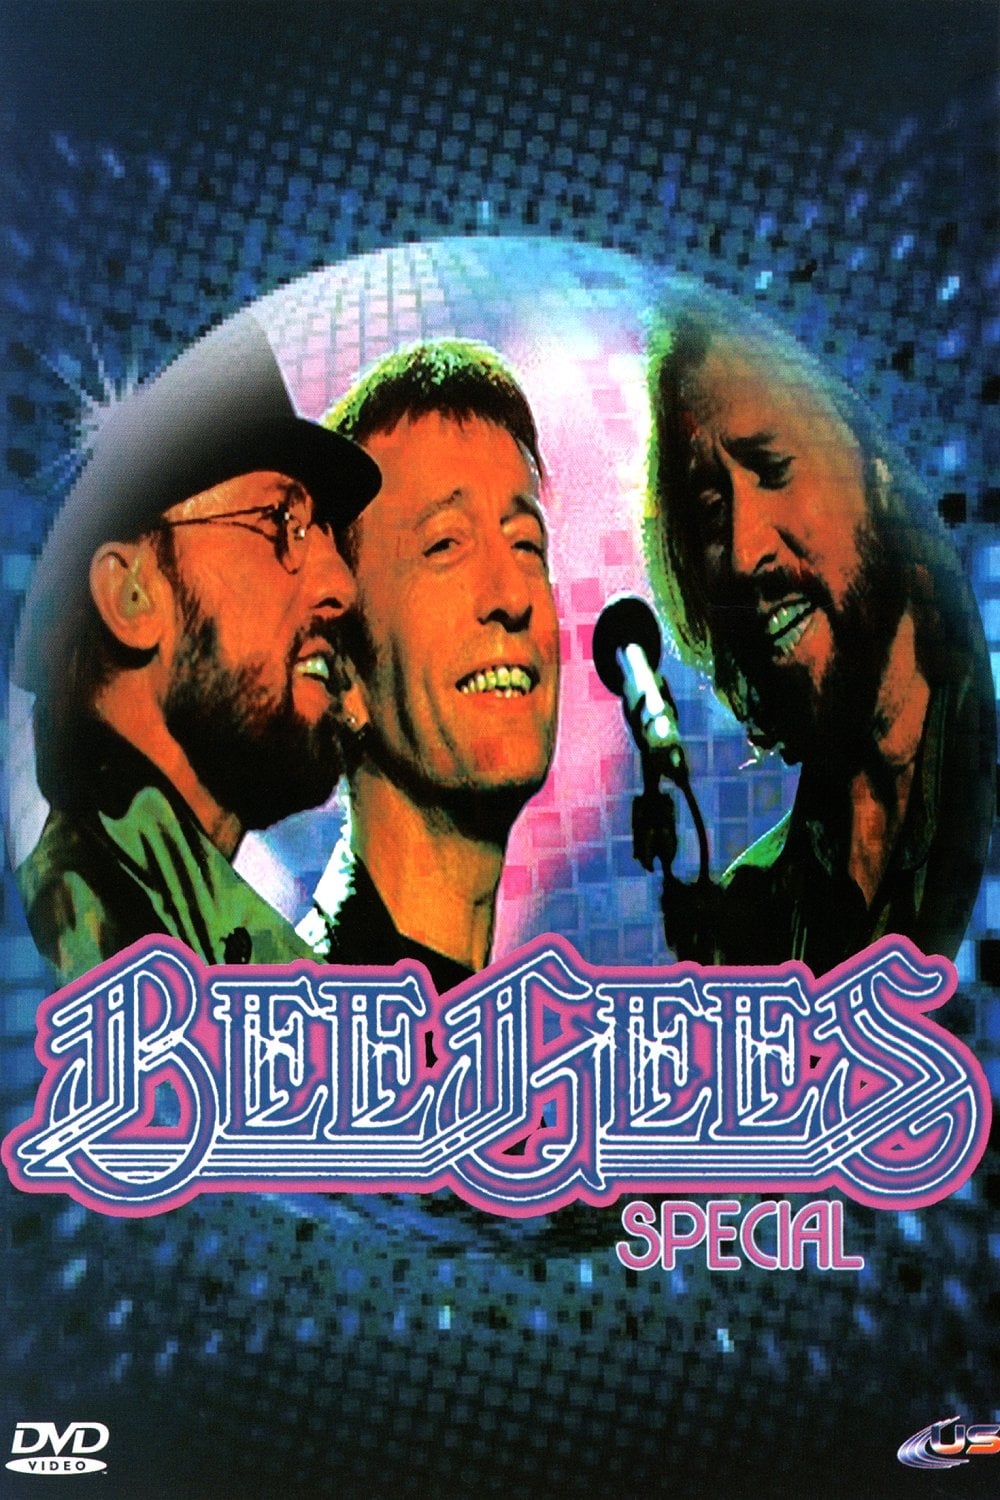 Bee Gees: Special